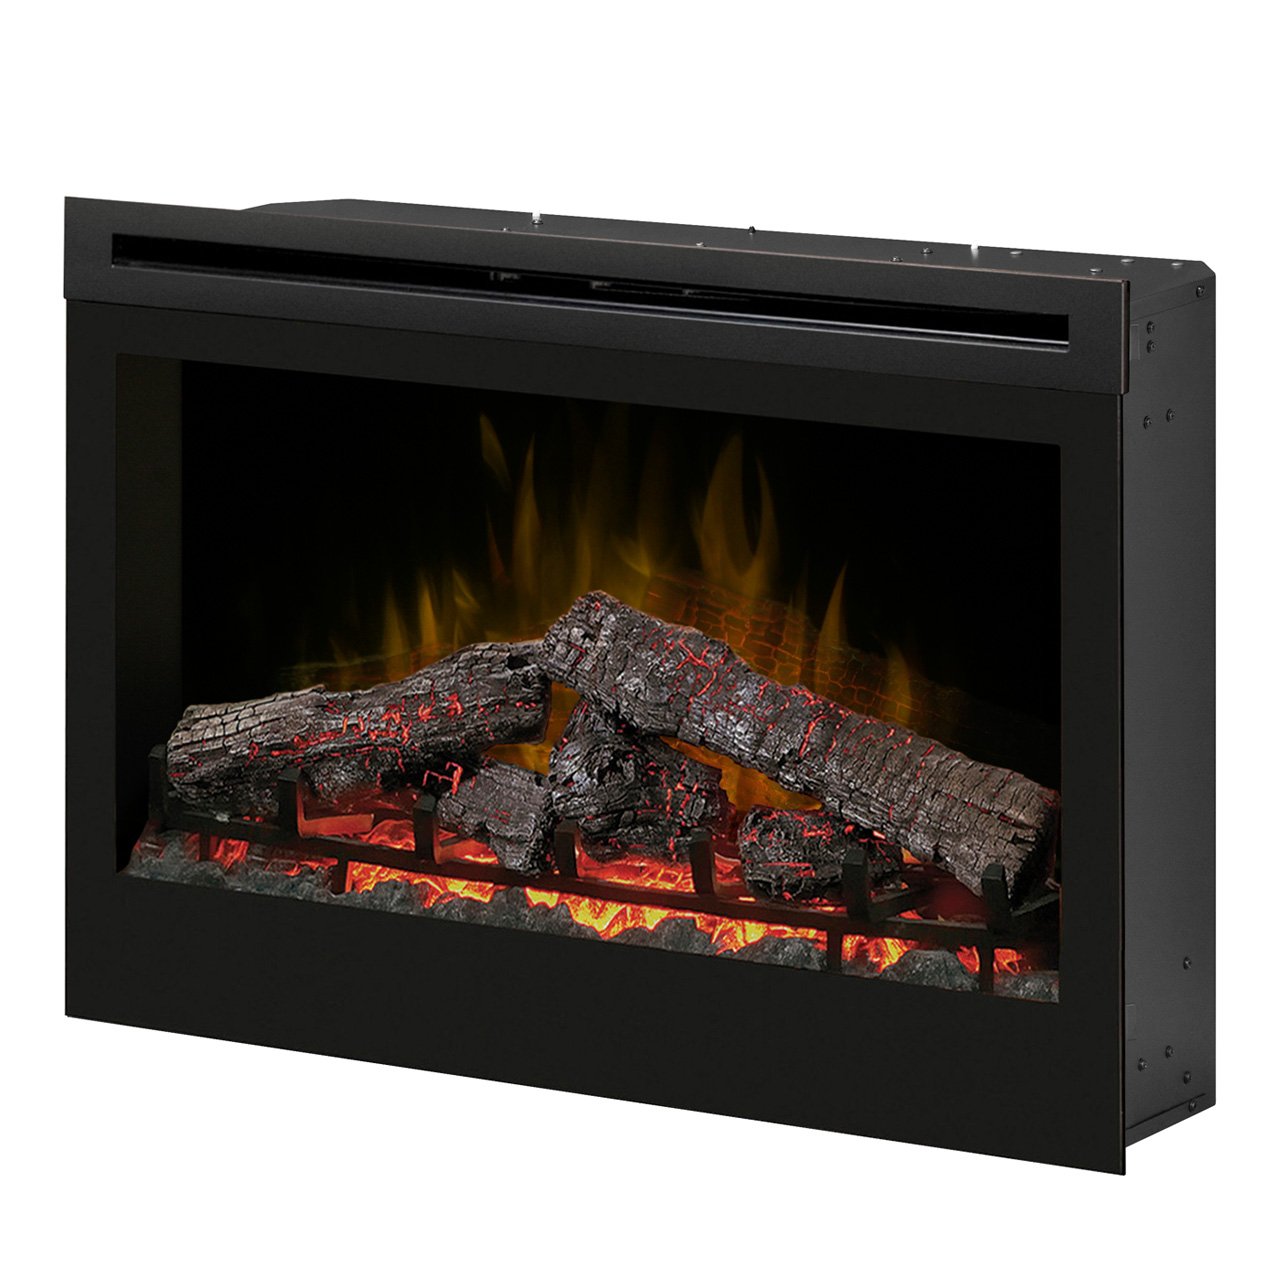 Gray Electric Fireplace Elegant Dimplex Df3033st 33 Inch Self Trimming Electric Fireplace Insert